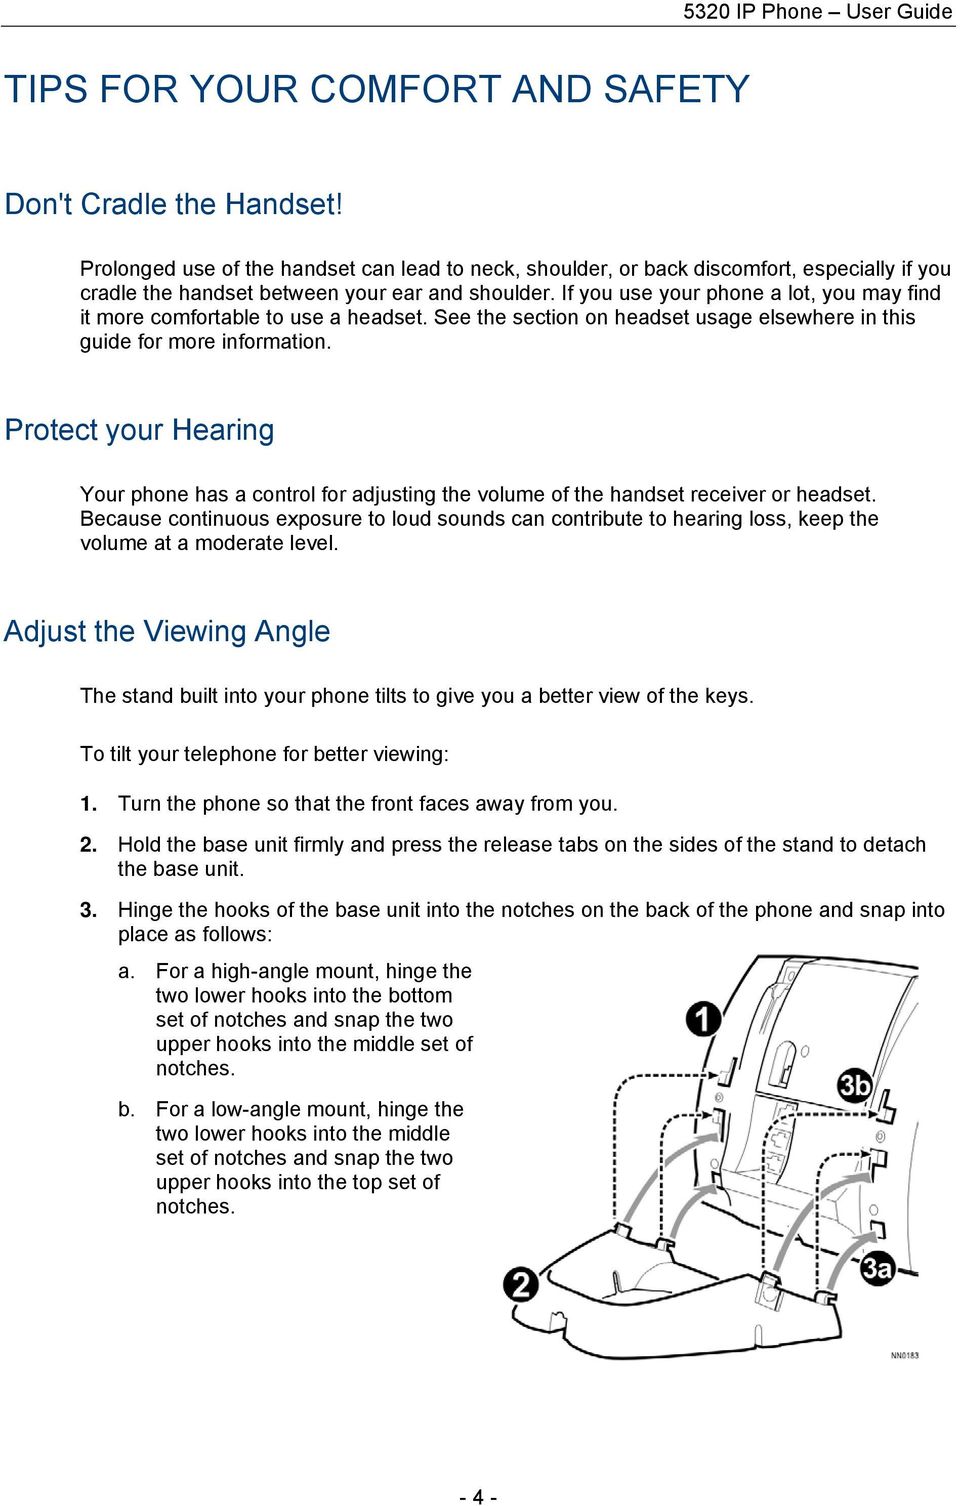 If you use your phone a lot, you may find it more comfortable to use a headset. See the section on headset usage elsewhere in this guide for more information.